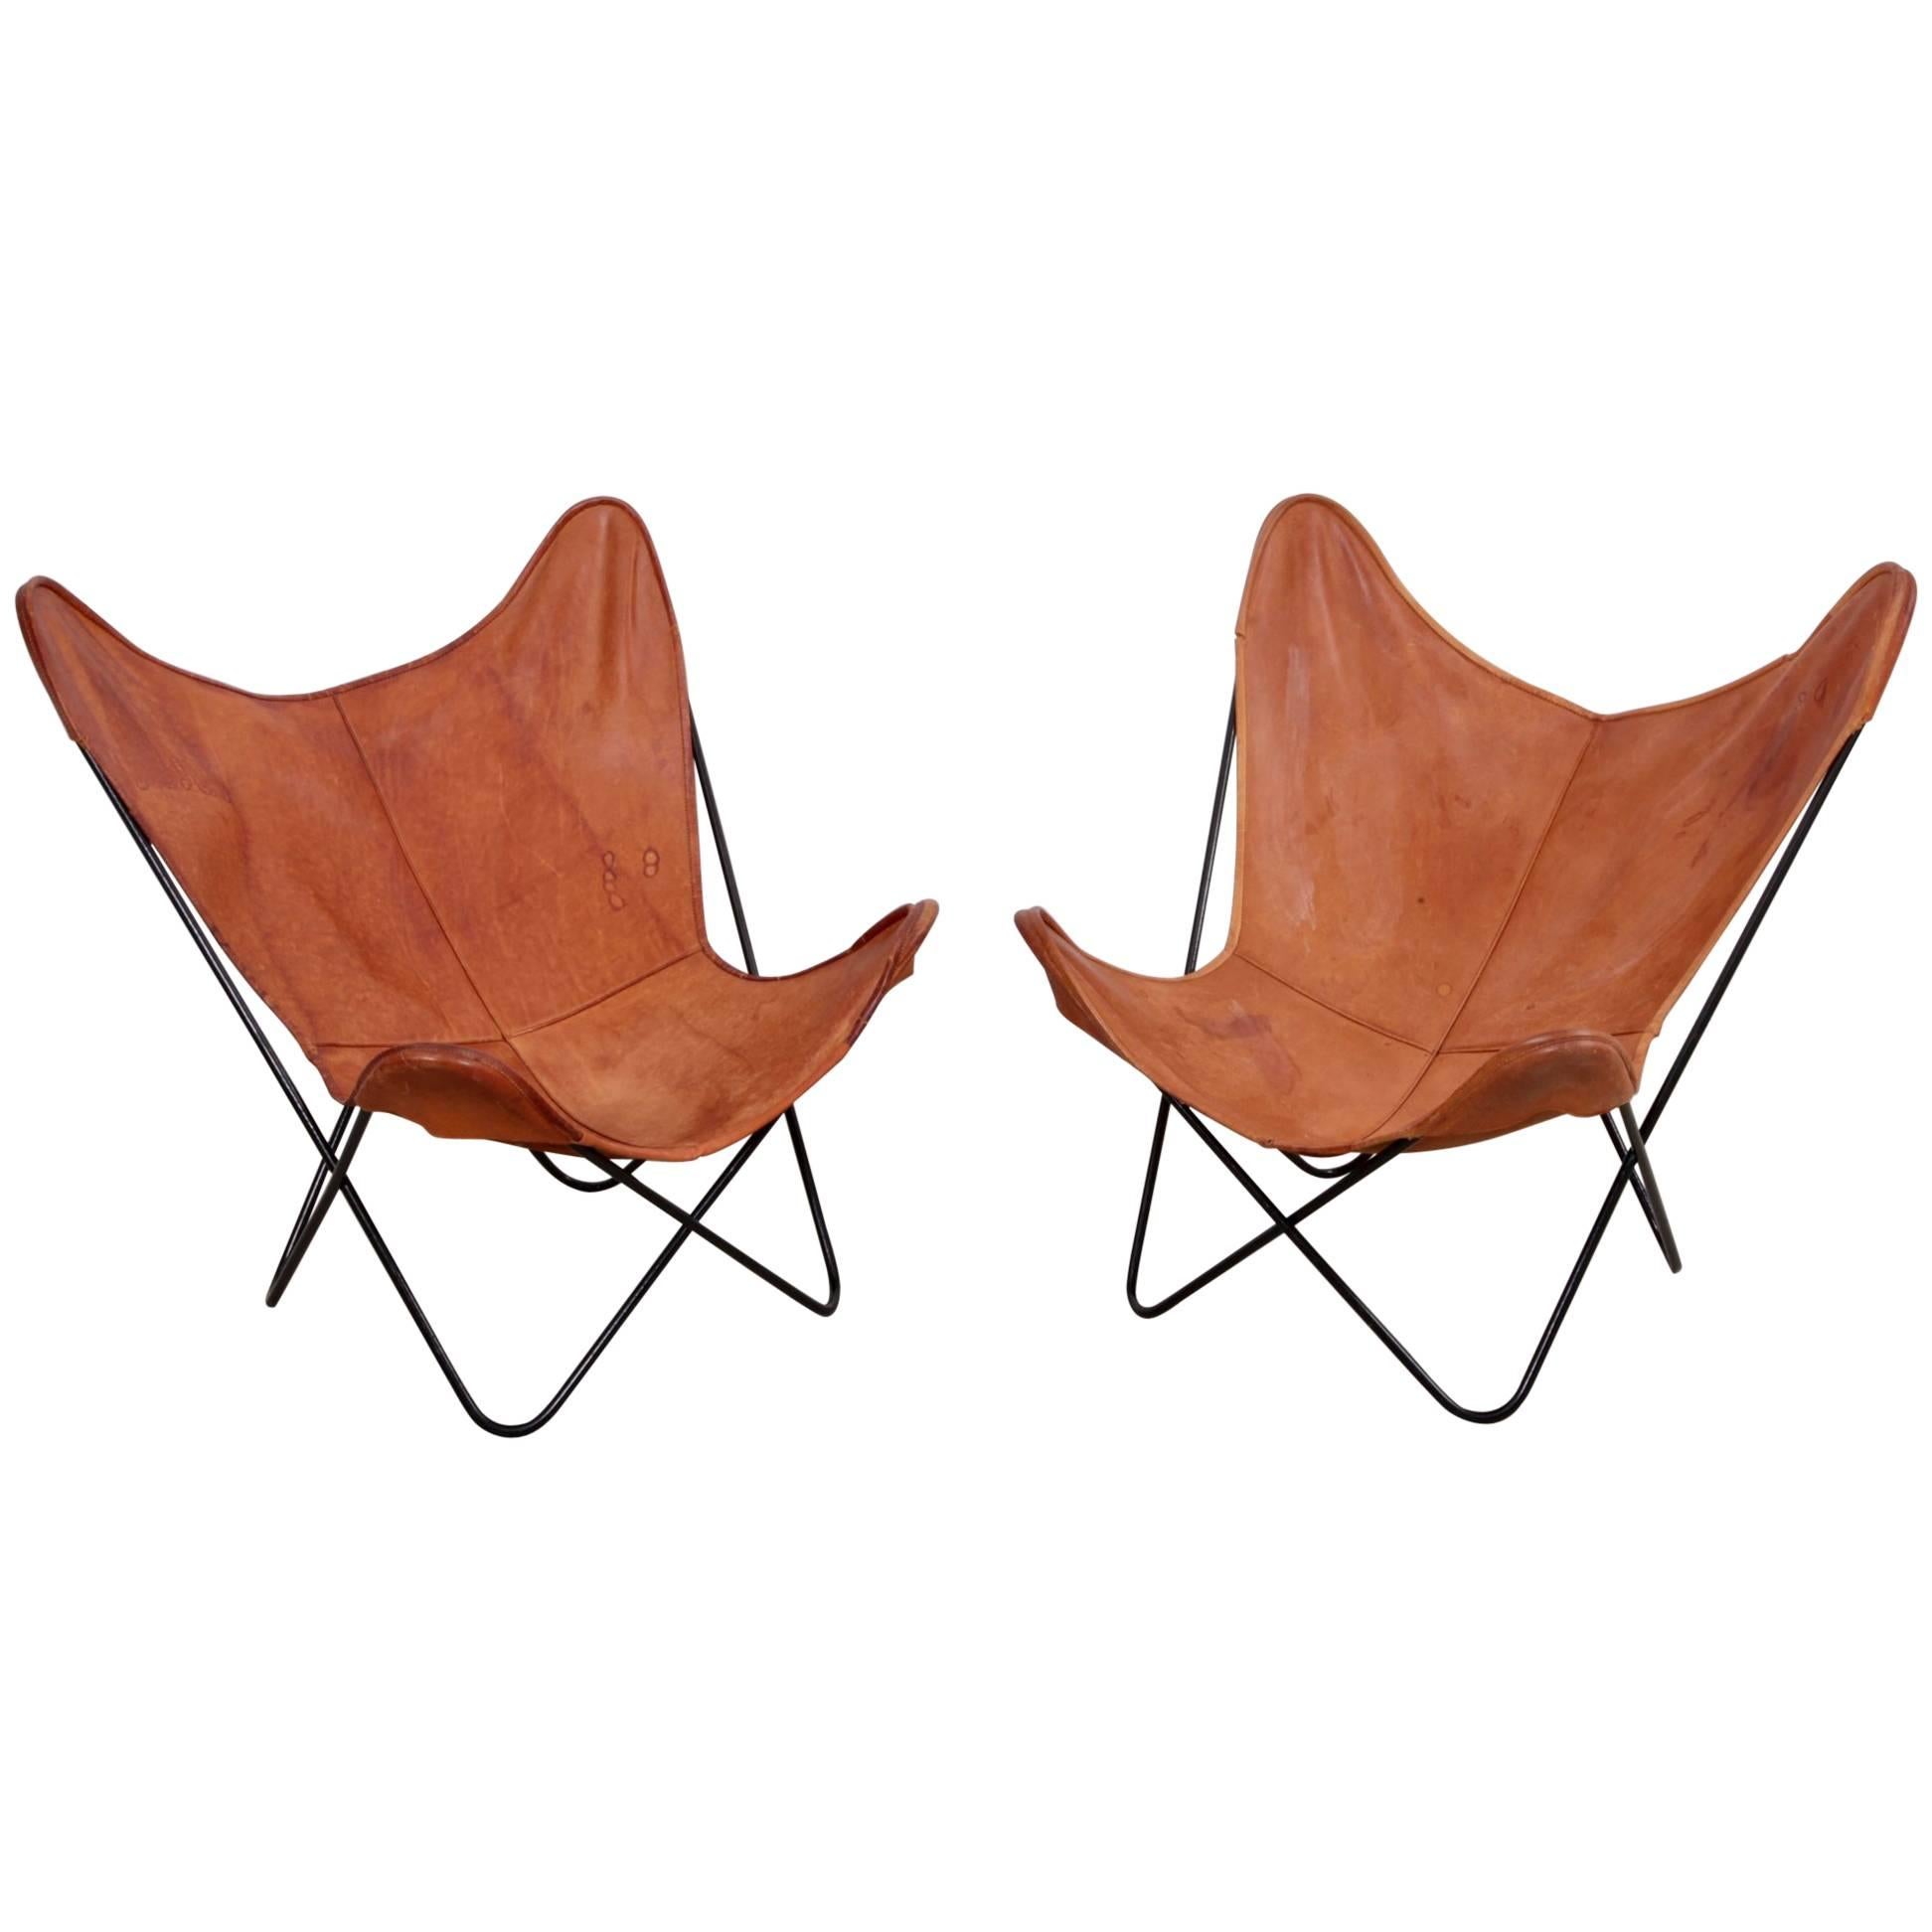 Rare Matched Pair of Ferrari Hardoy Butterfly Chairs for Knoll 